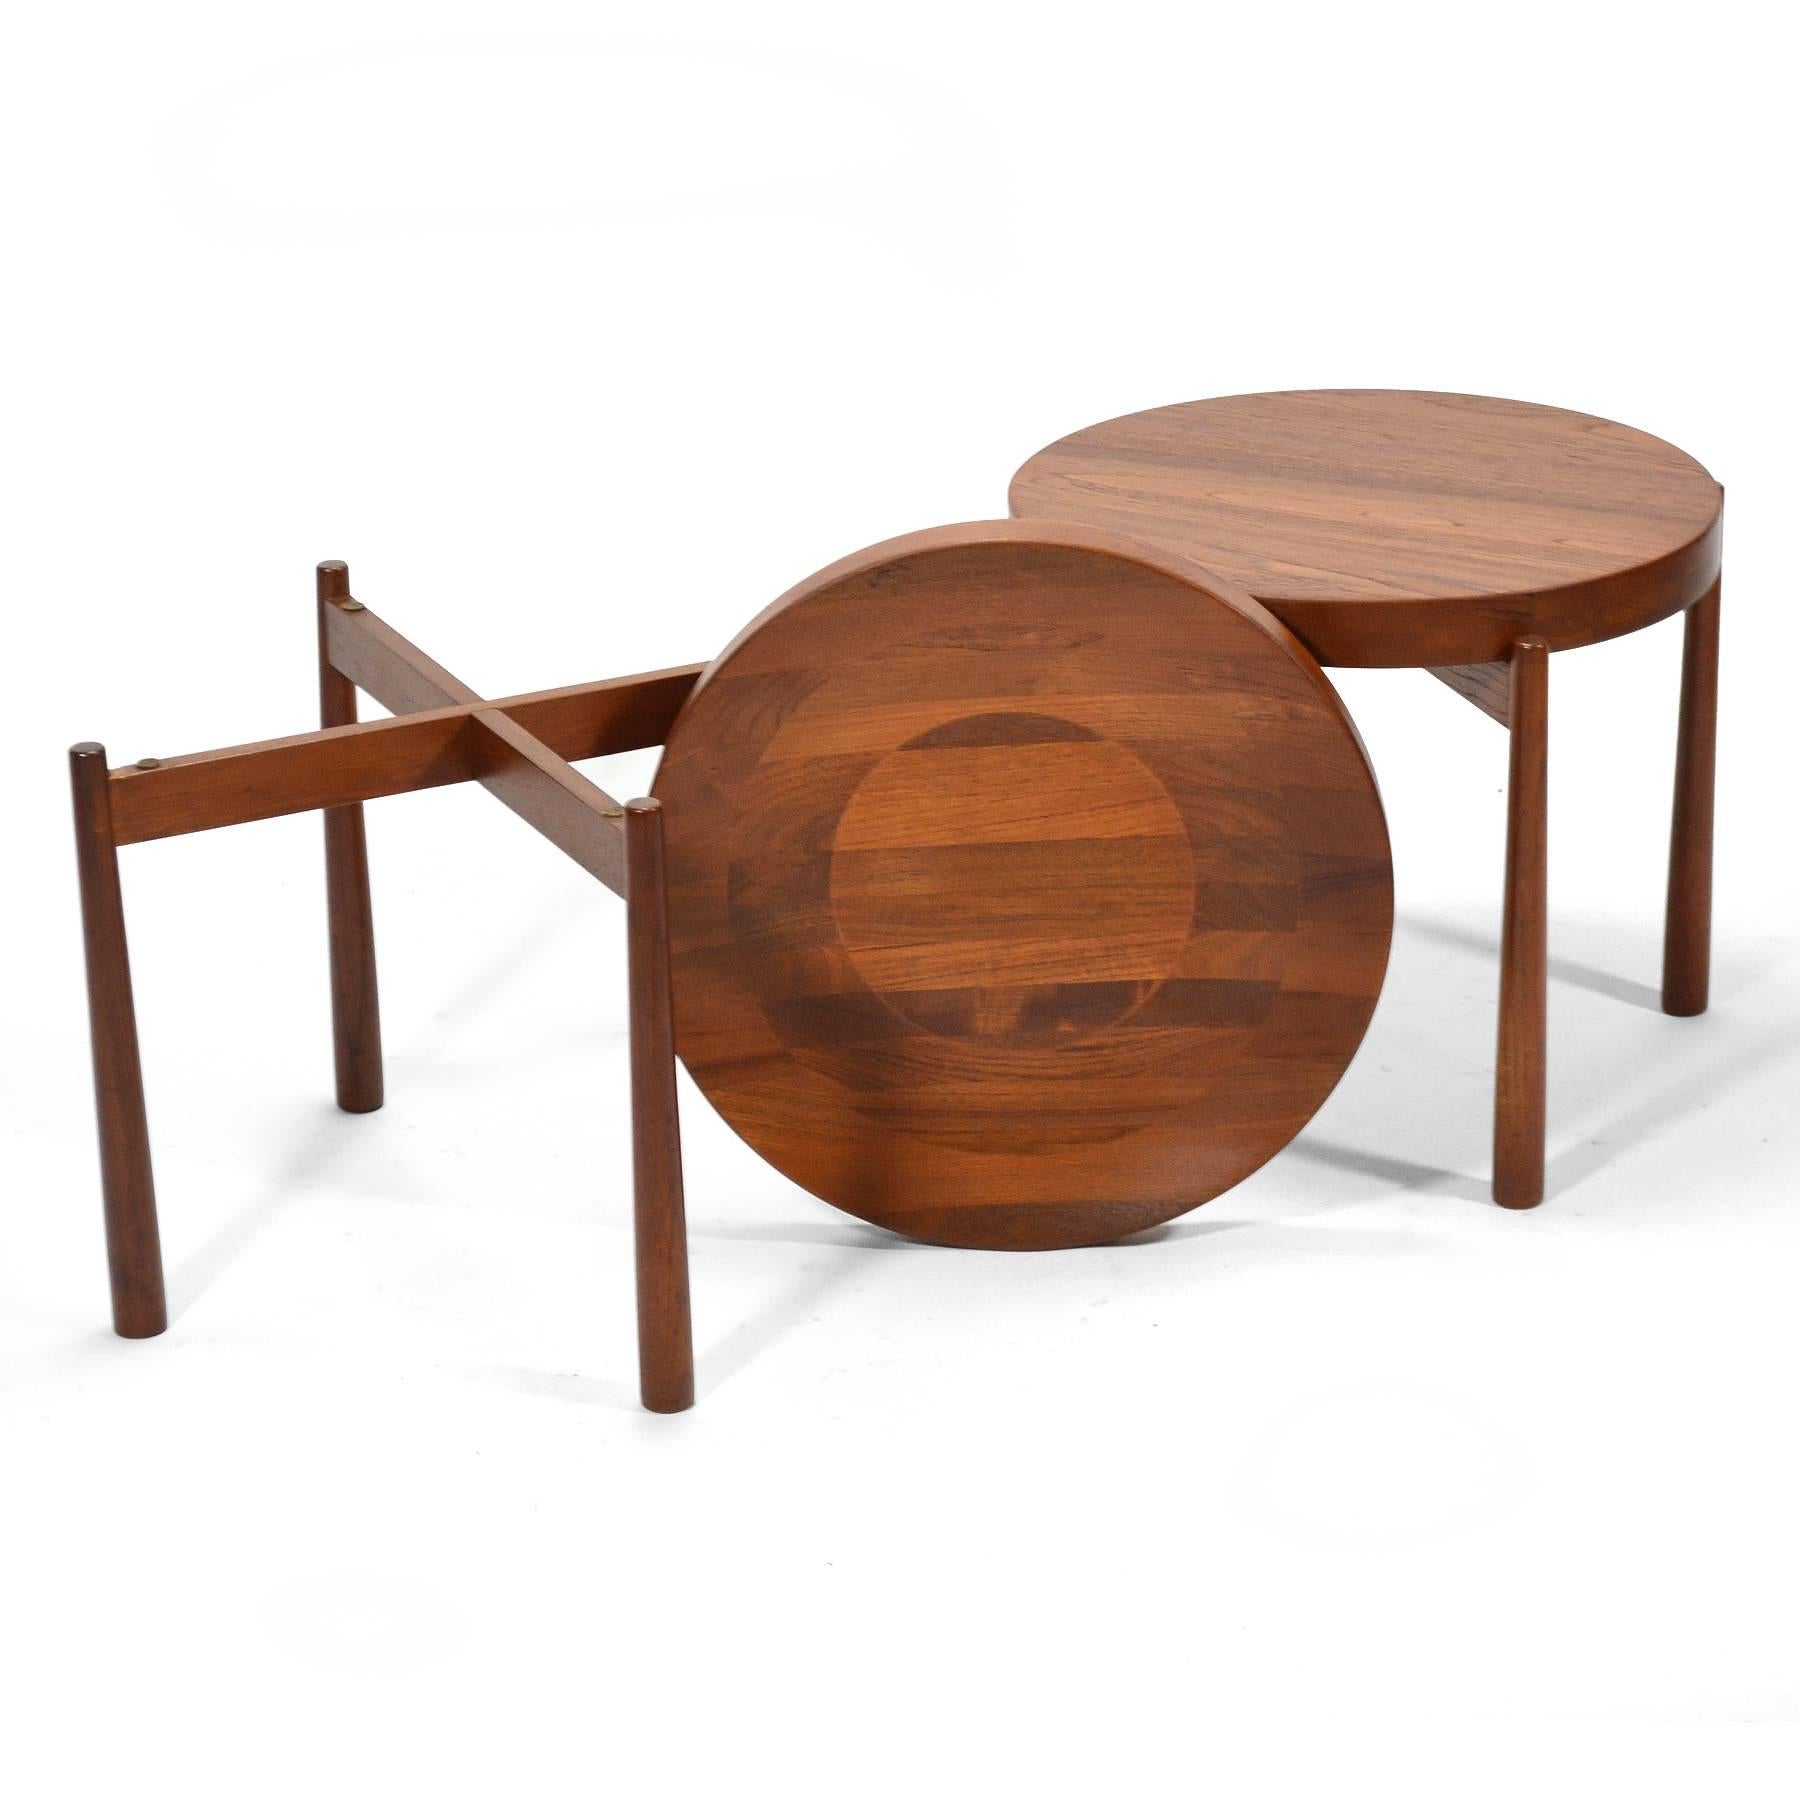 Mid-20th Century Swedish Solid Teak Flip-Top Tables in the Manner of Jens Quistgaard For Sale